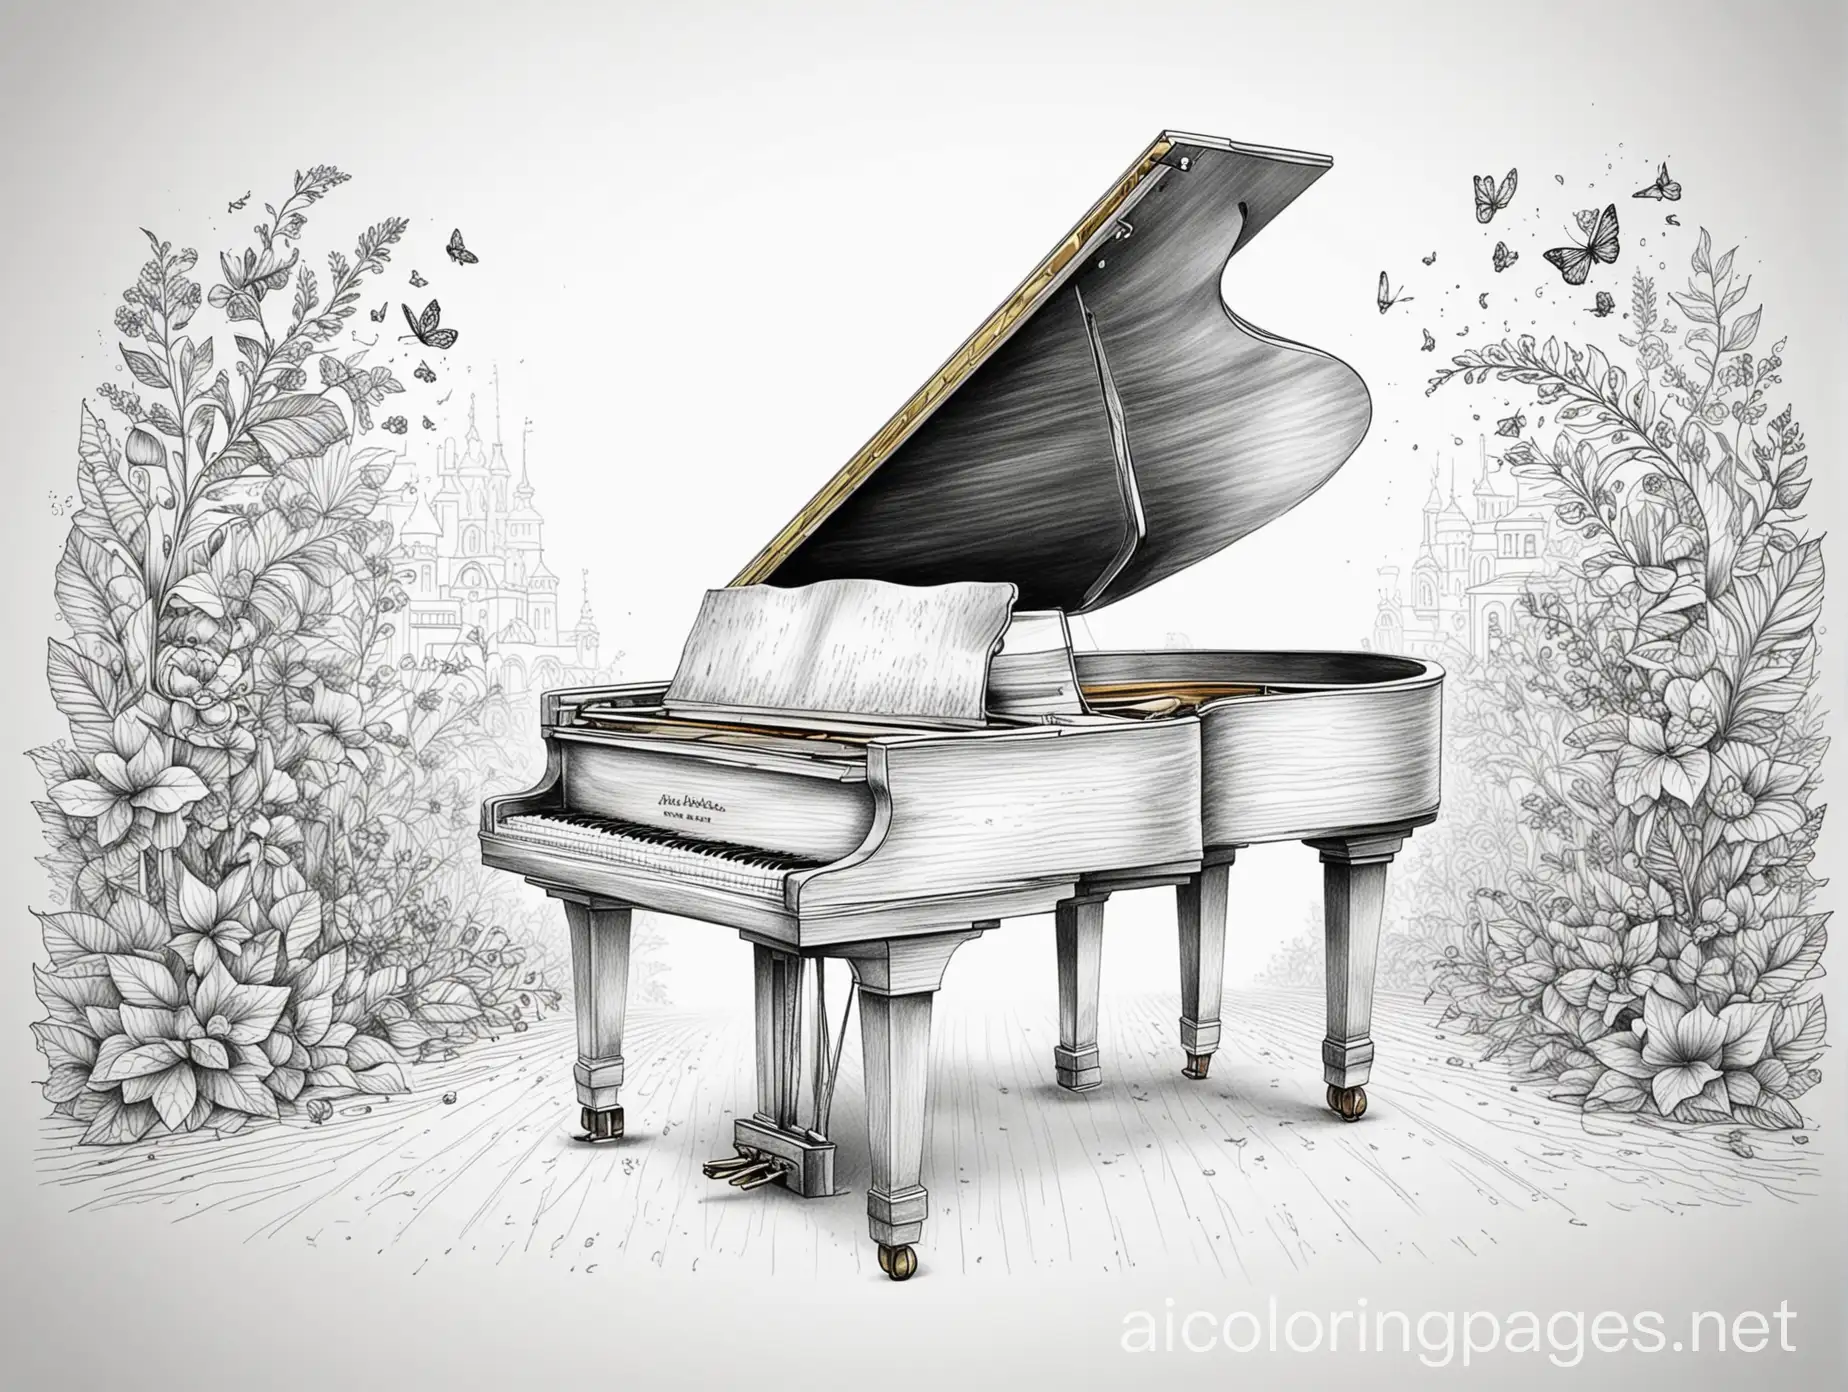 Mindfulness-Doodle-Coloring-Page-Grand-Piano-Serenity